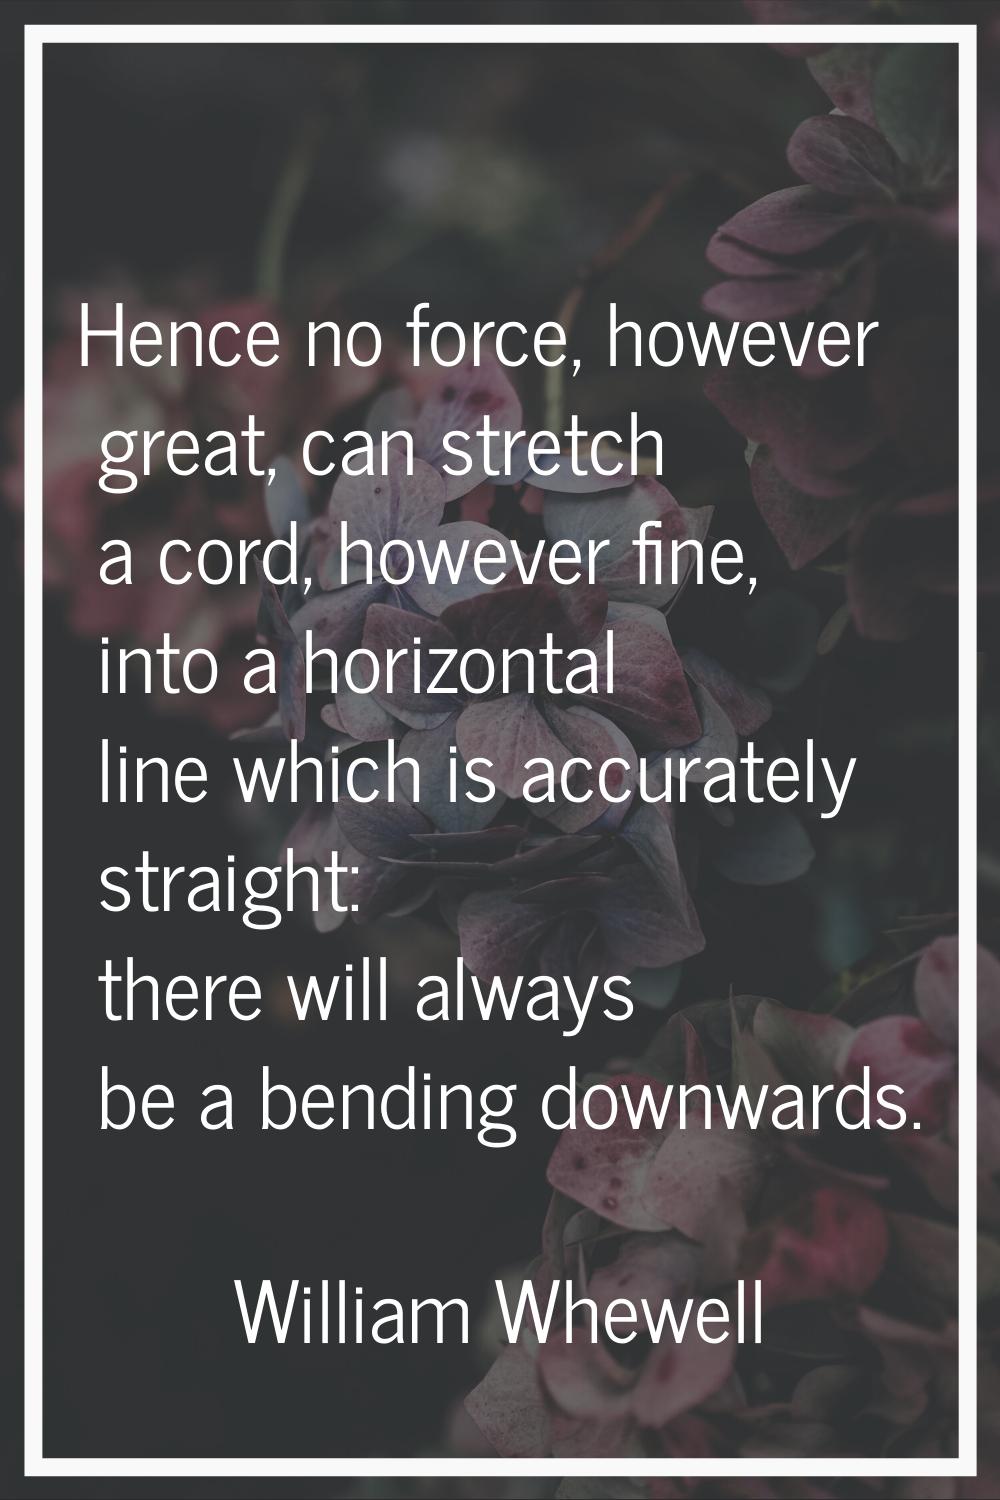 Hence no force, however great, can stretch a cord, however fine, into a horizontal line which is ac